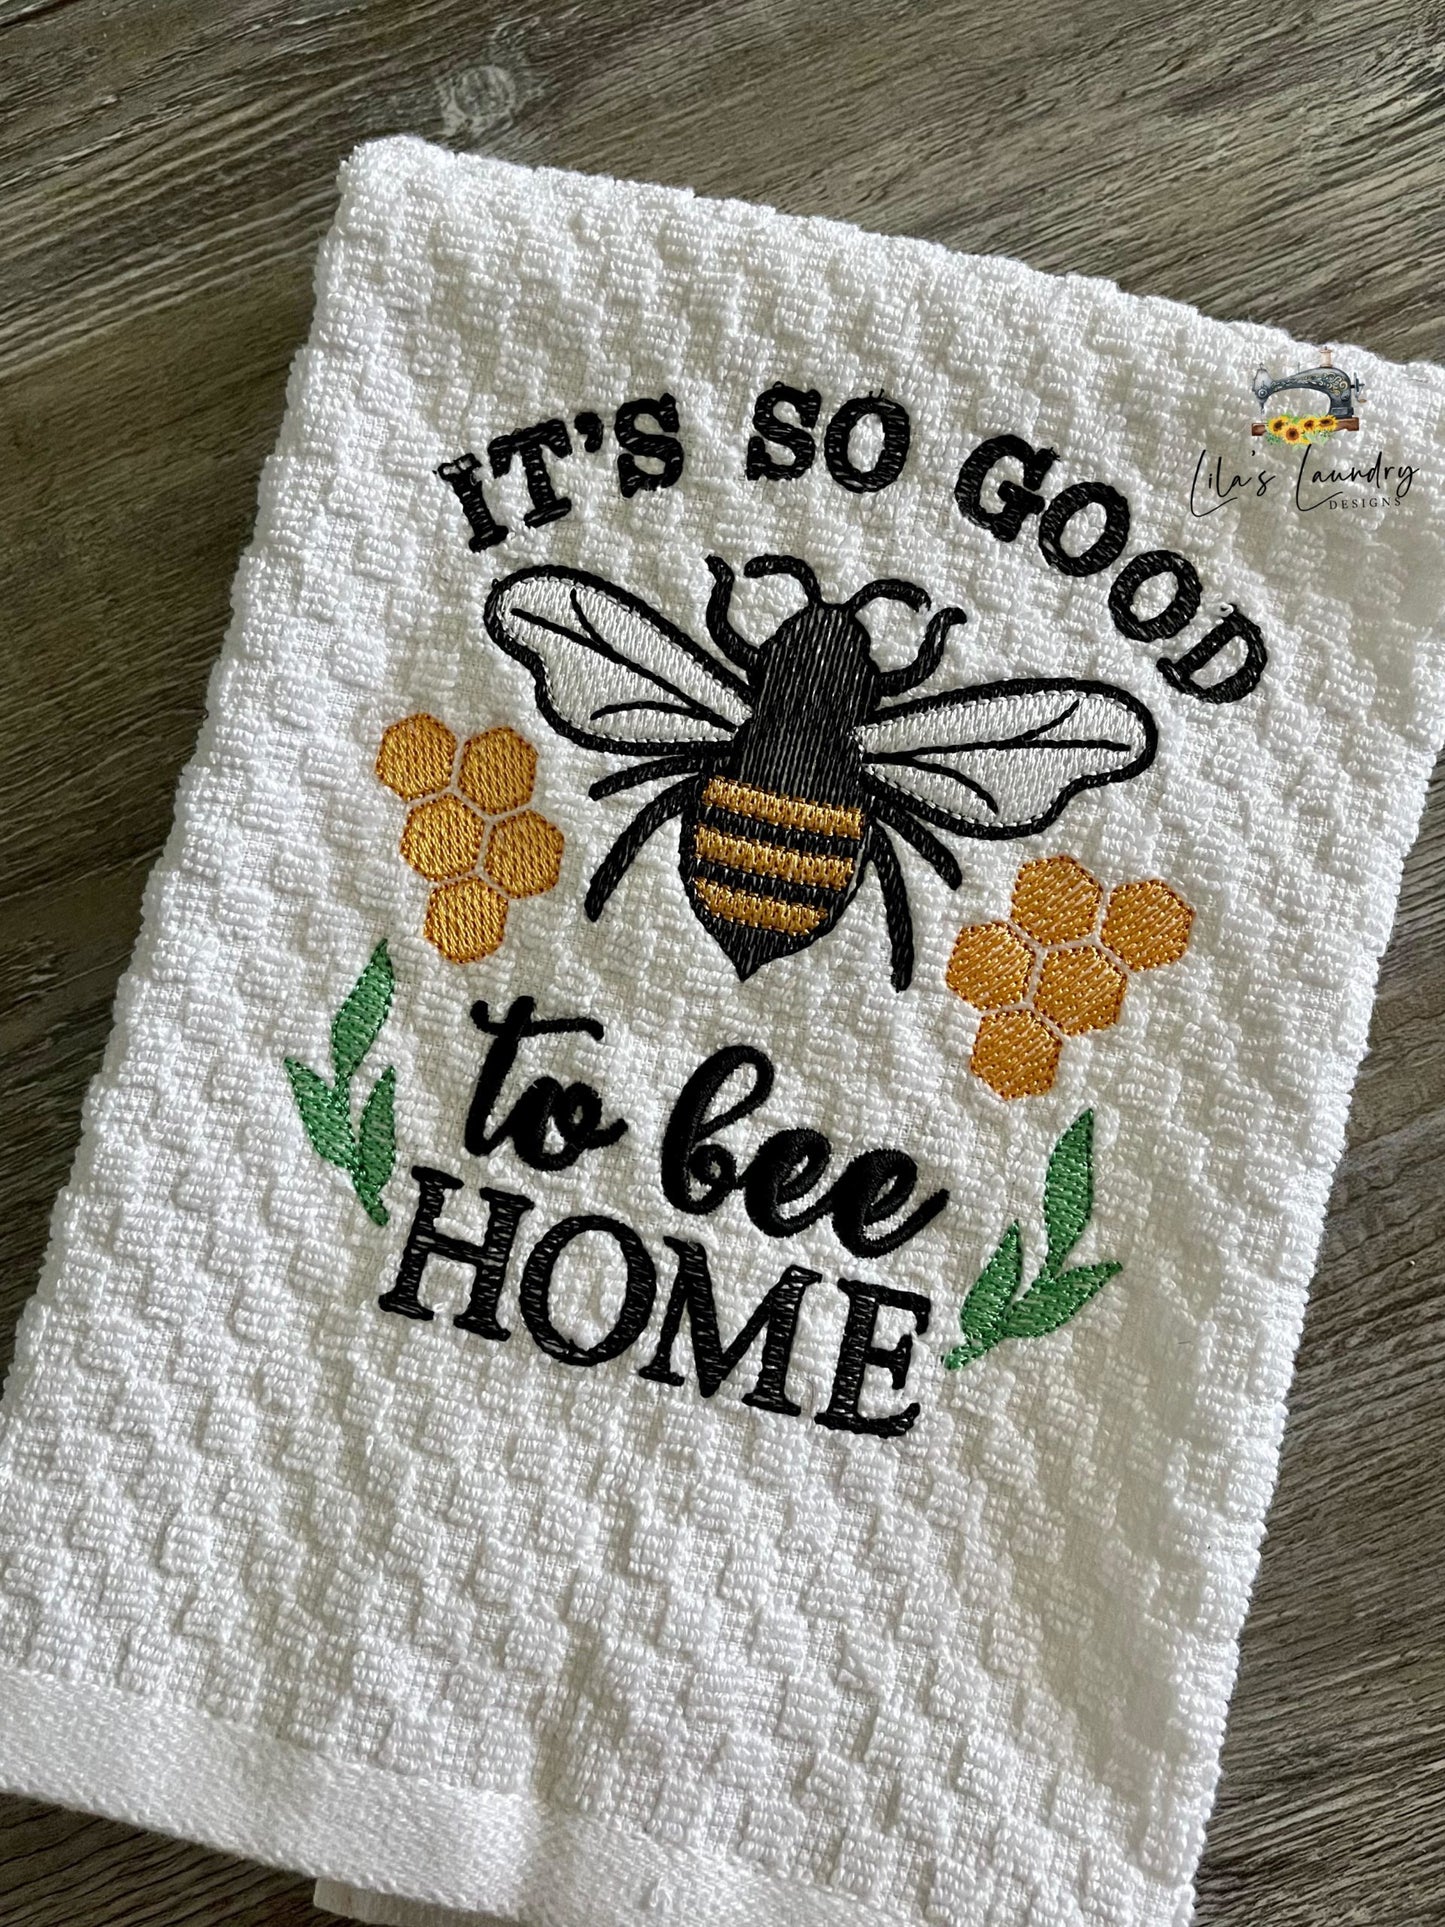 So Good to Bee Home - 4 sizes- Digital Embroidery Design